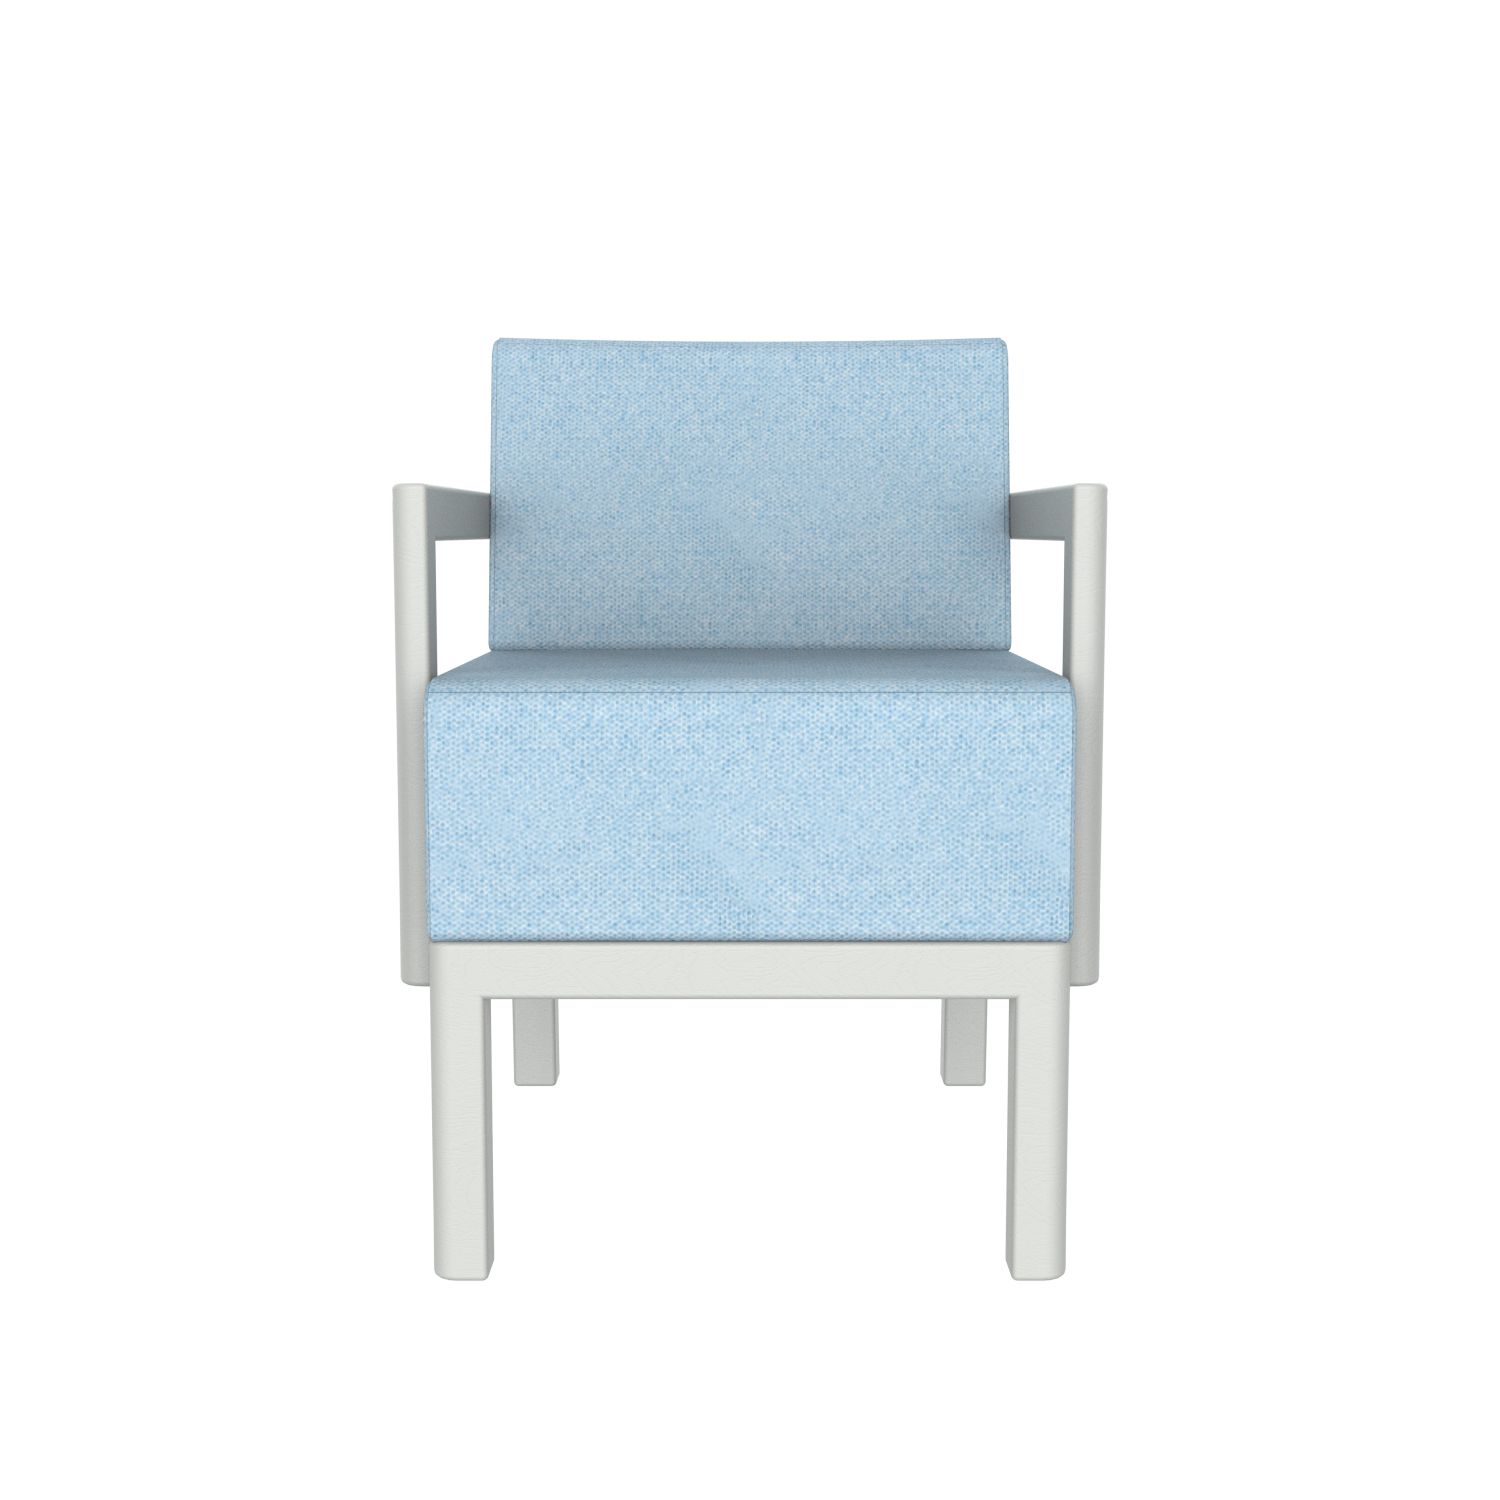 lensvelt piet boon chair 02 with armrests moss pastel blue 40 price level 2 light grey ral7035 hard leg ends